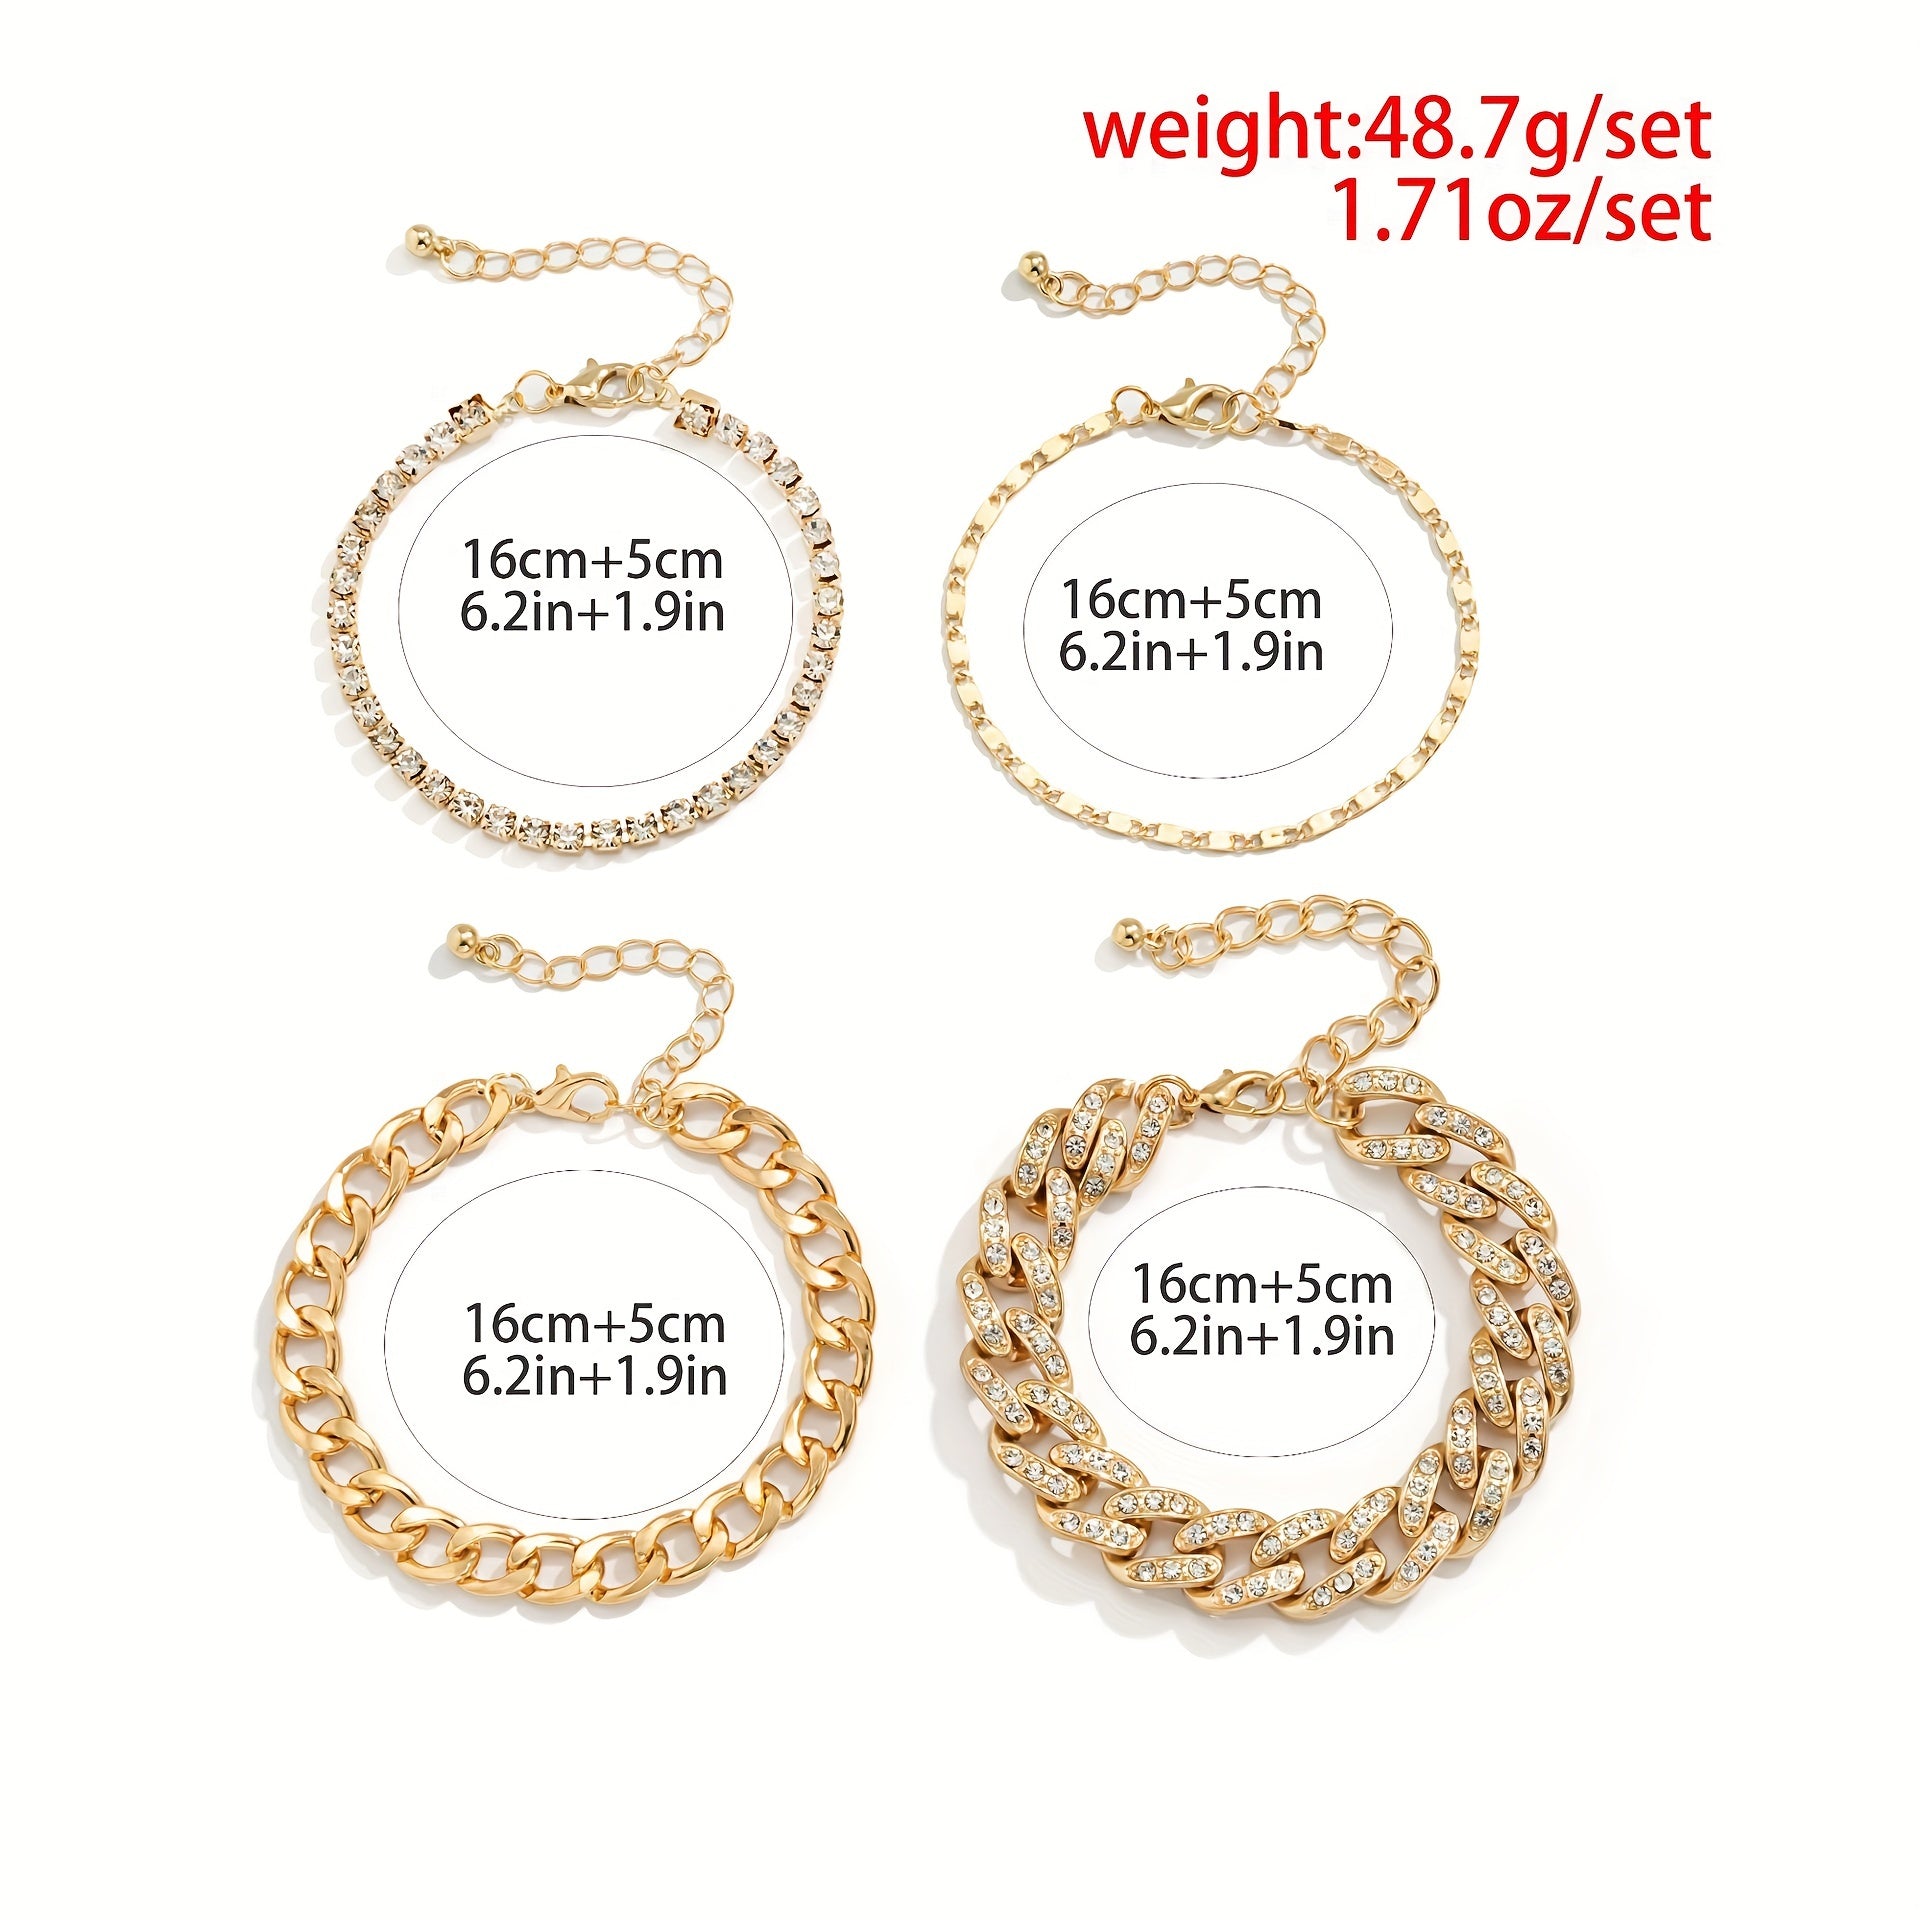 4-Piece Cuban Openwork Bracelet Set - A Perfect Gift for the Special Women in Your Life!